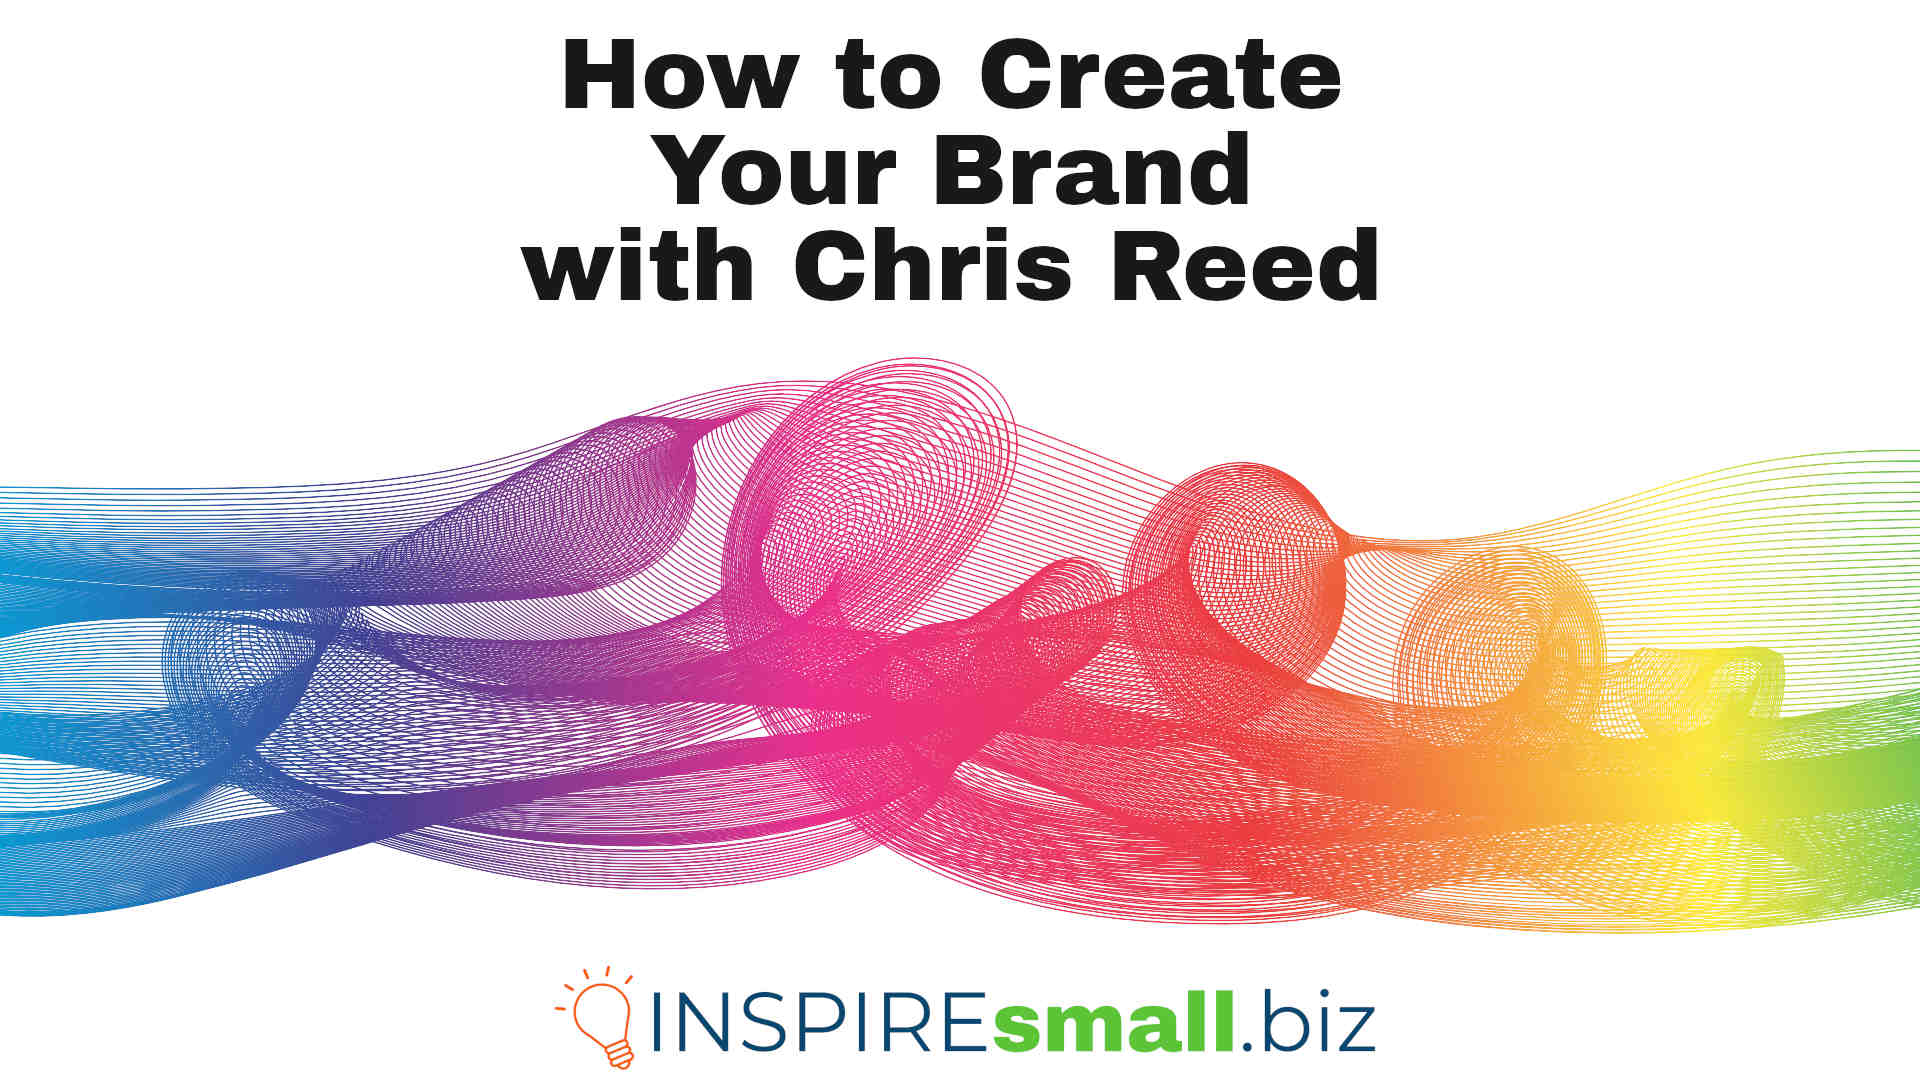 How to Create Your Brand with Chris Reed, hosted by INSPIREsmall.biz